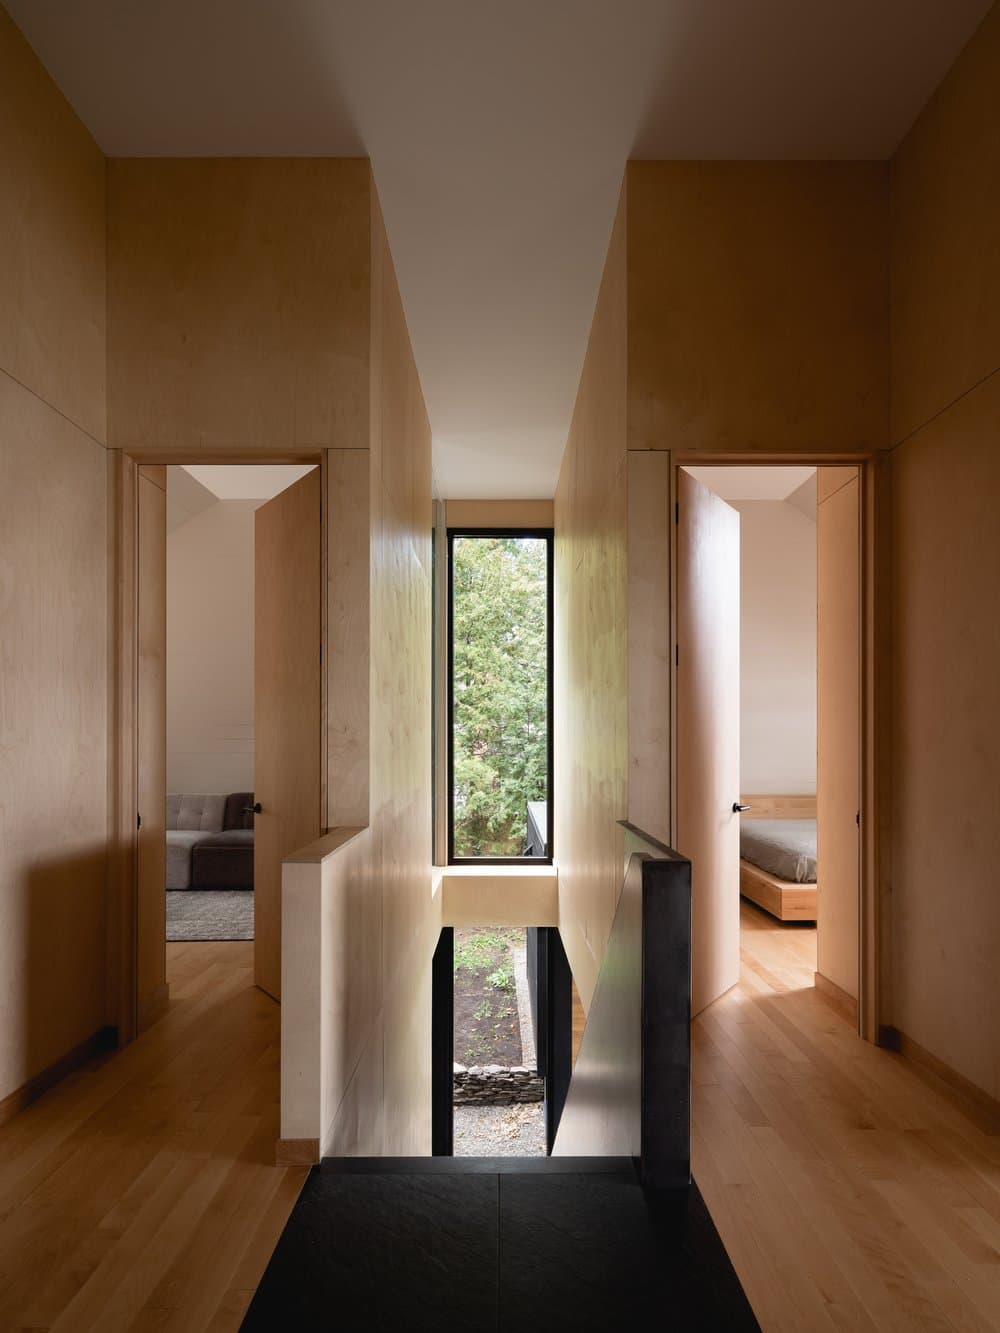 second floor, bedrooms, staircase, Natalie Dionne Architecture